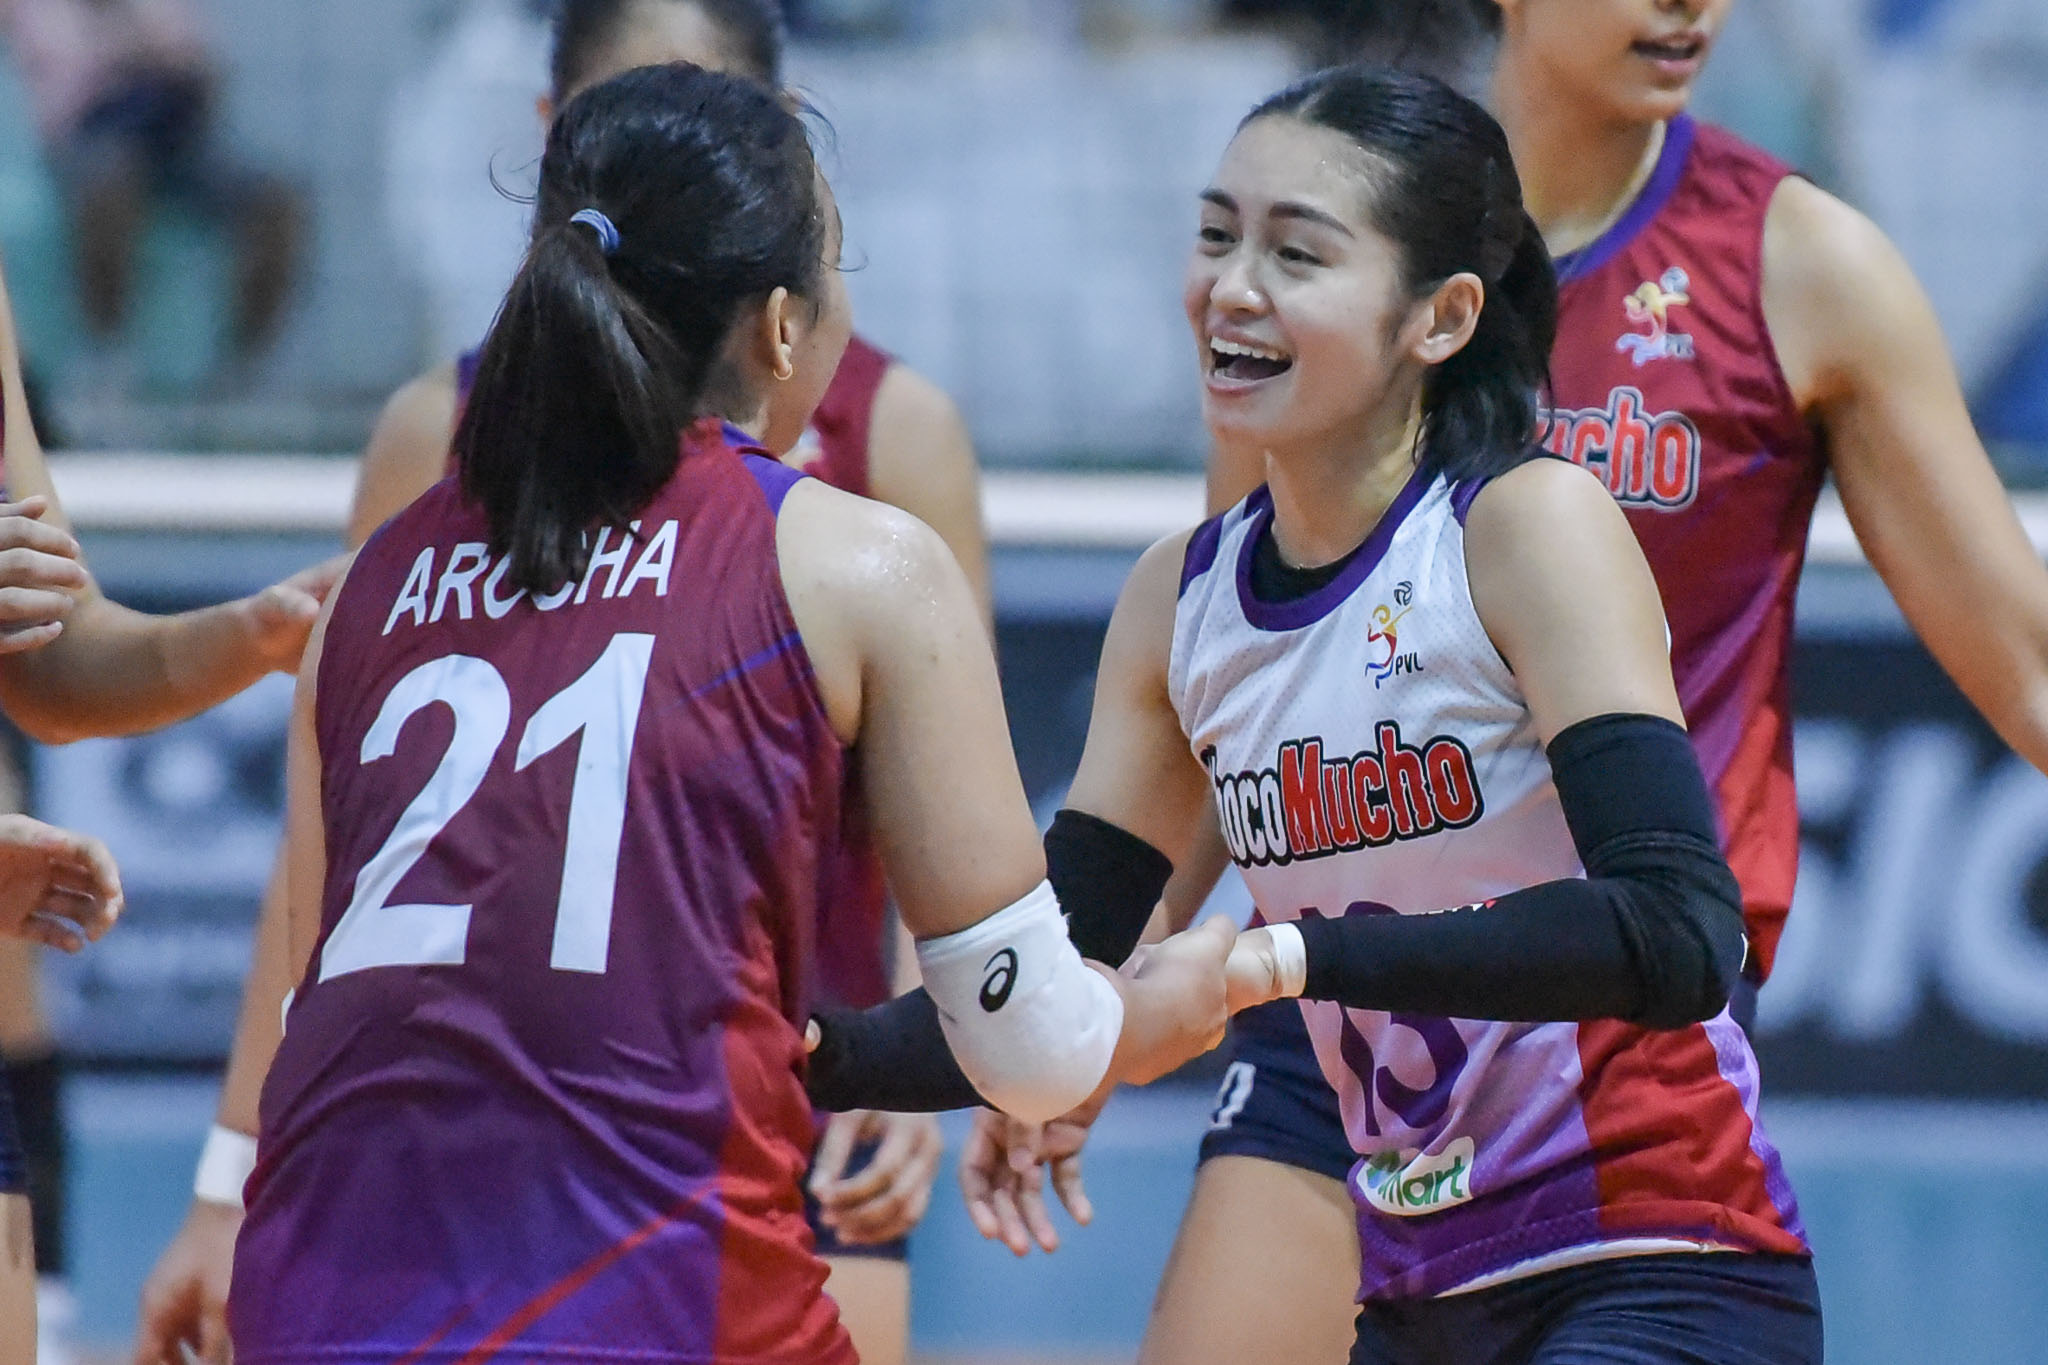 2021-PVL-Open-Chery-Tiggo-vs.-Choco-Mucho-Semis-G2-Denden-Lazaro-Revilla-2784 With short turnaround, Almadro reminds Choco Mucho to let go of Game Two loss News PVL Volleyball  - philippine sports news